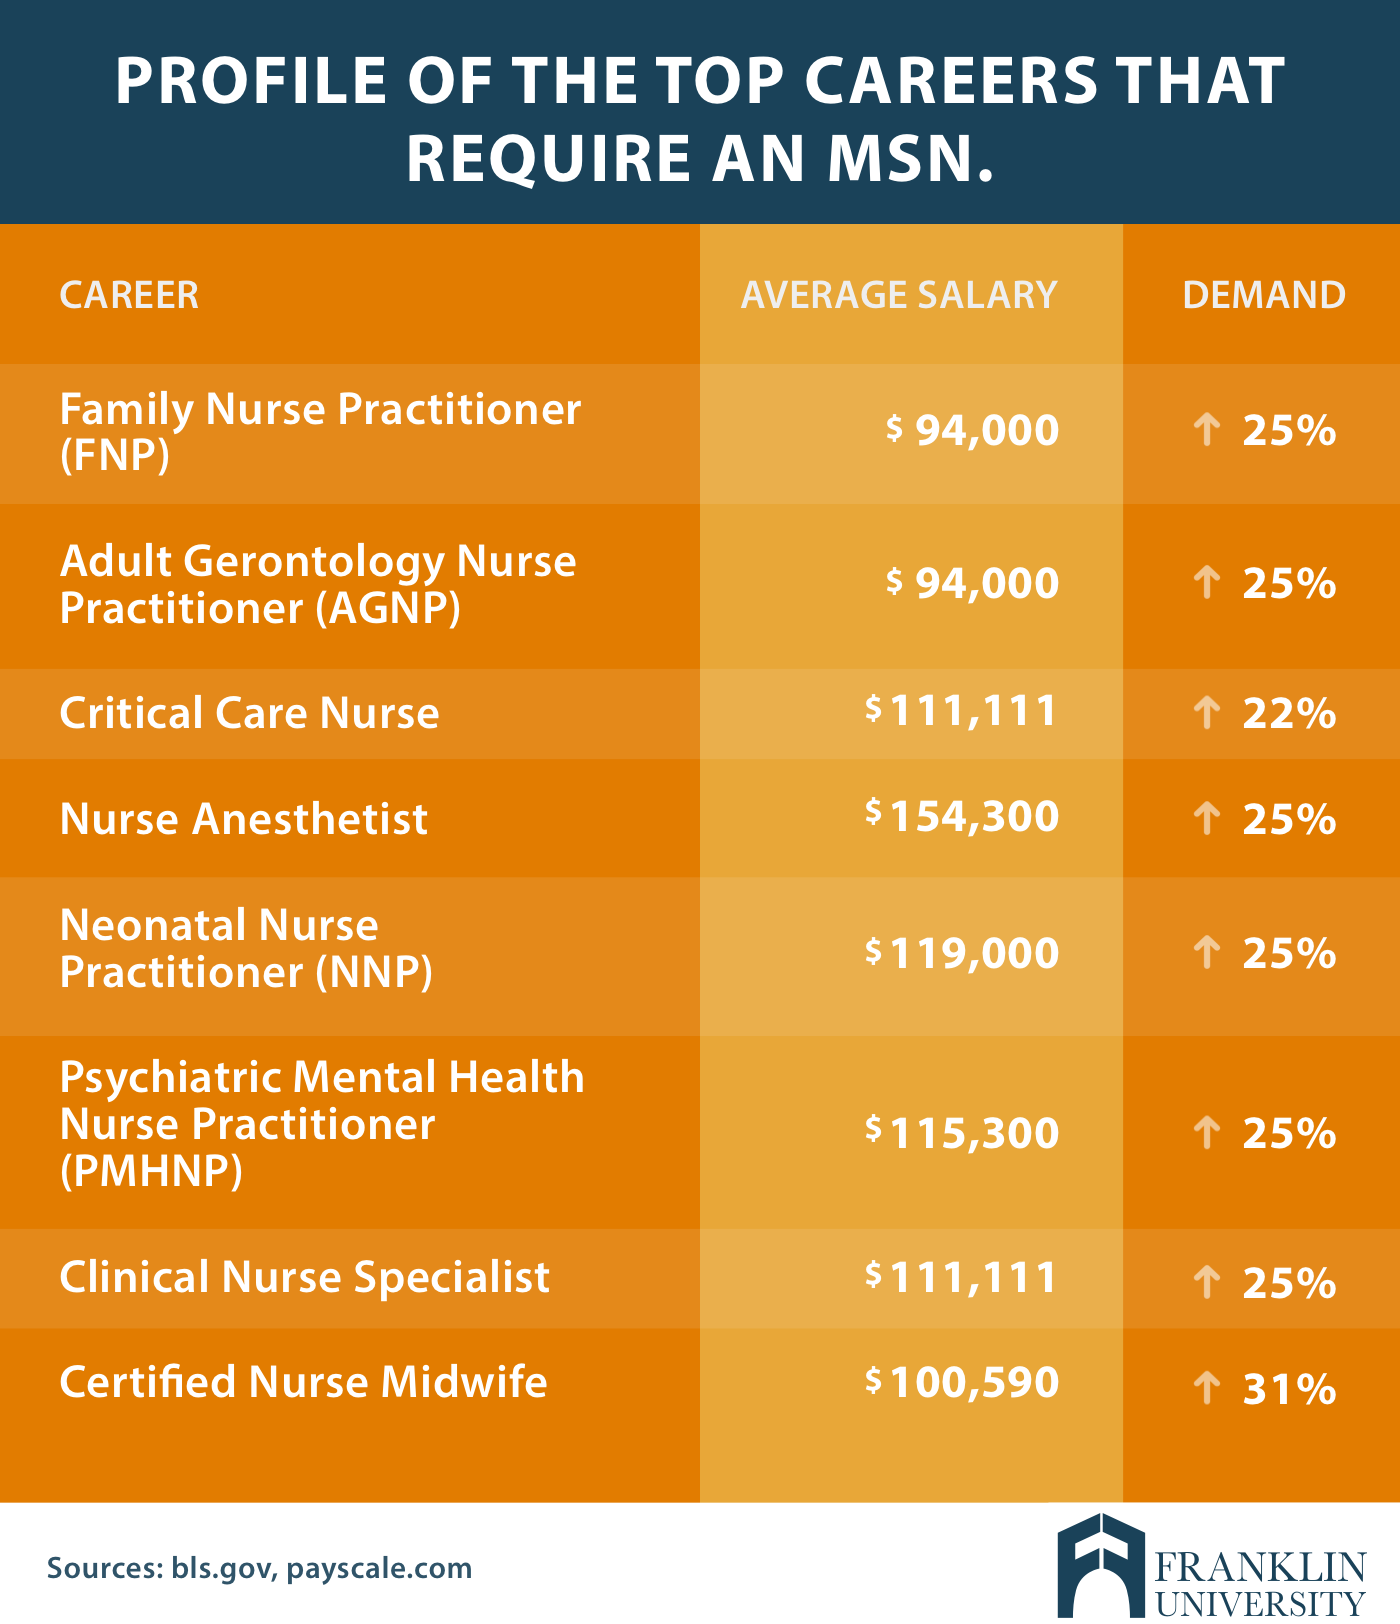 graphic describes the profile of the top careers that require an MSN